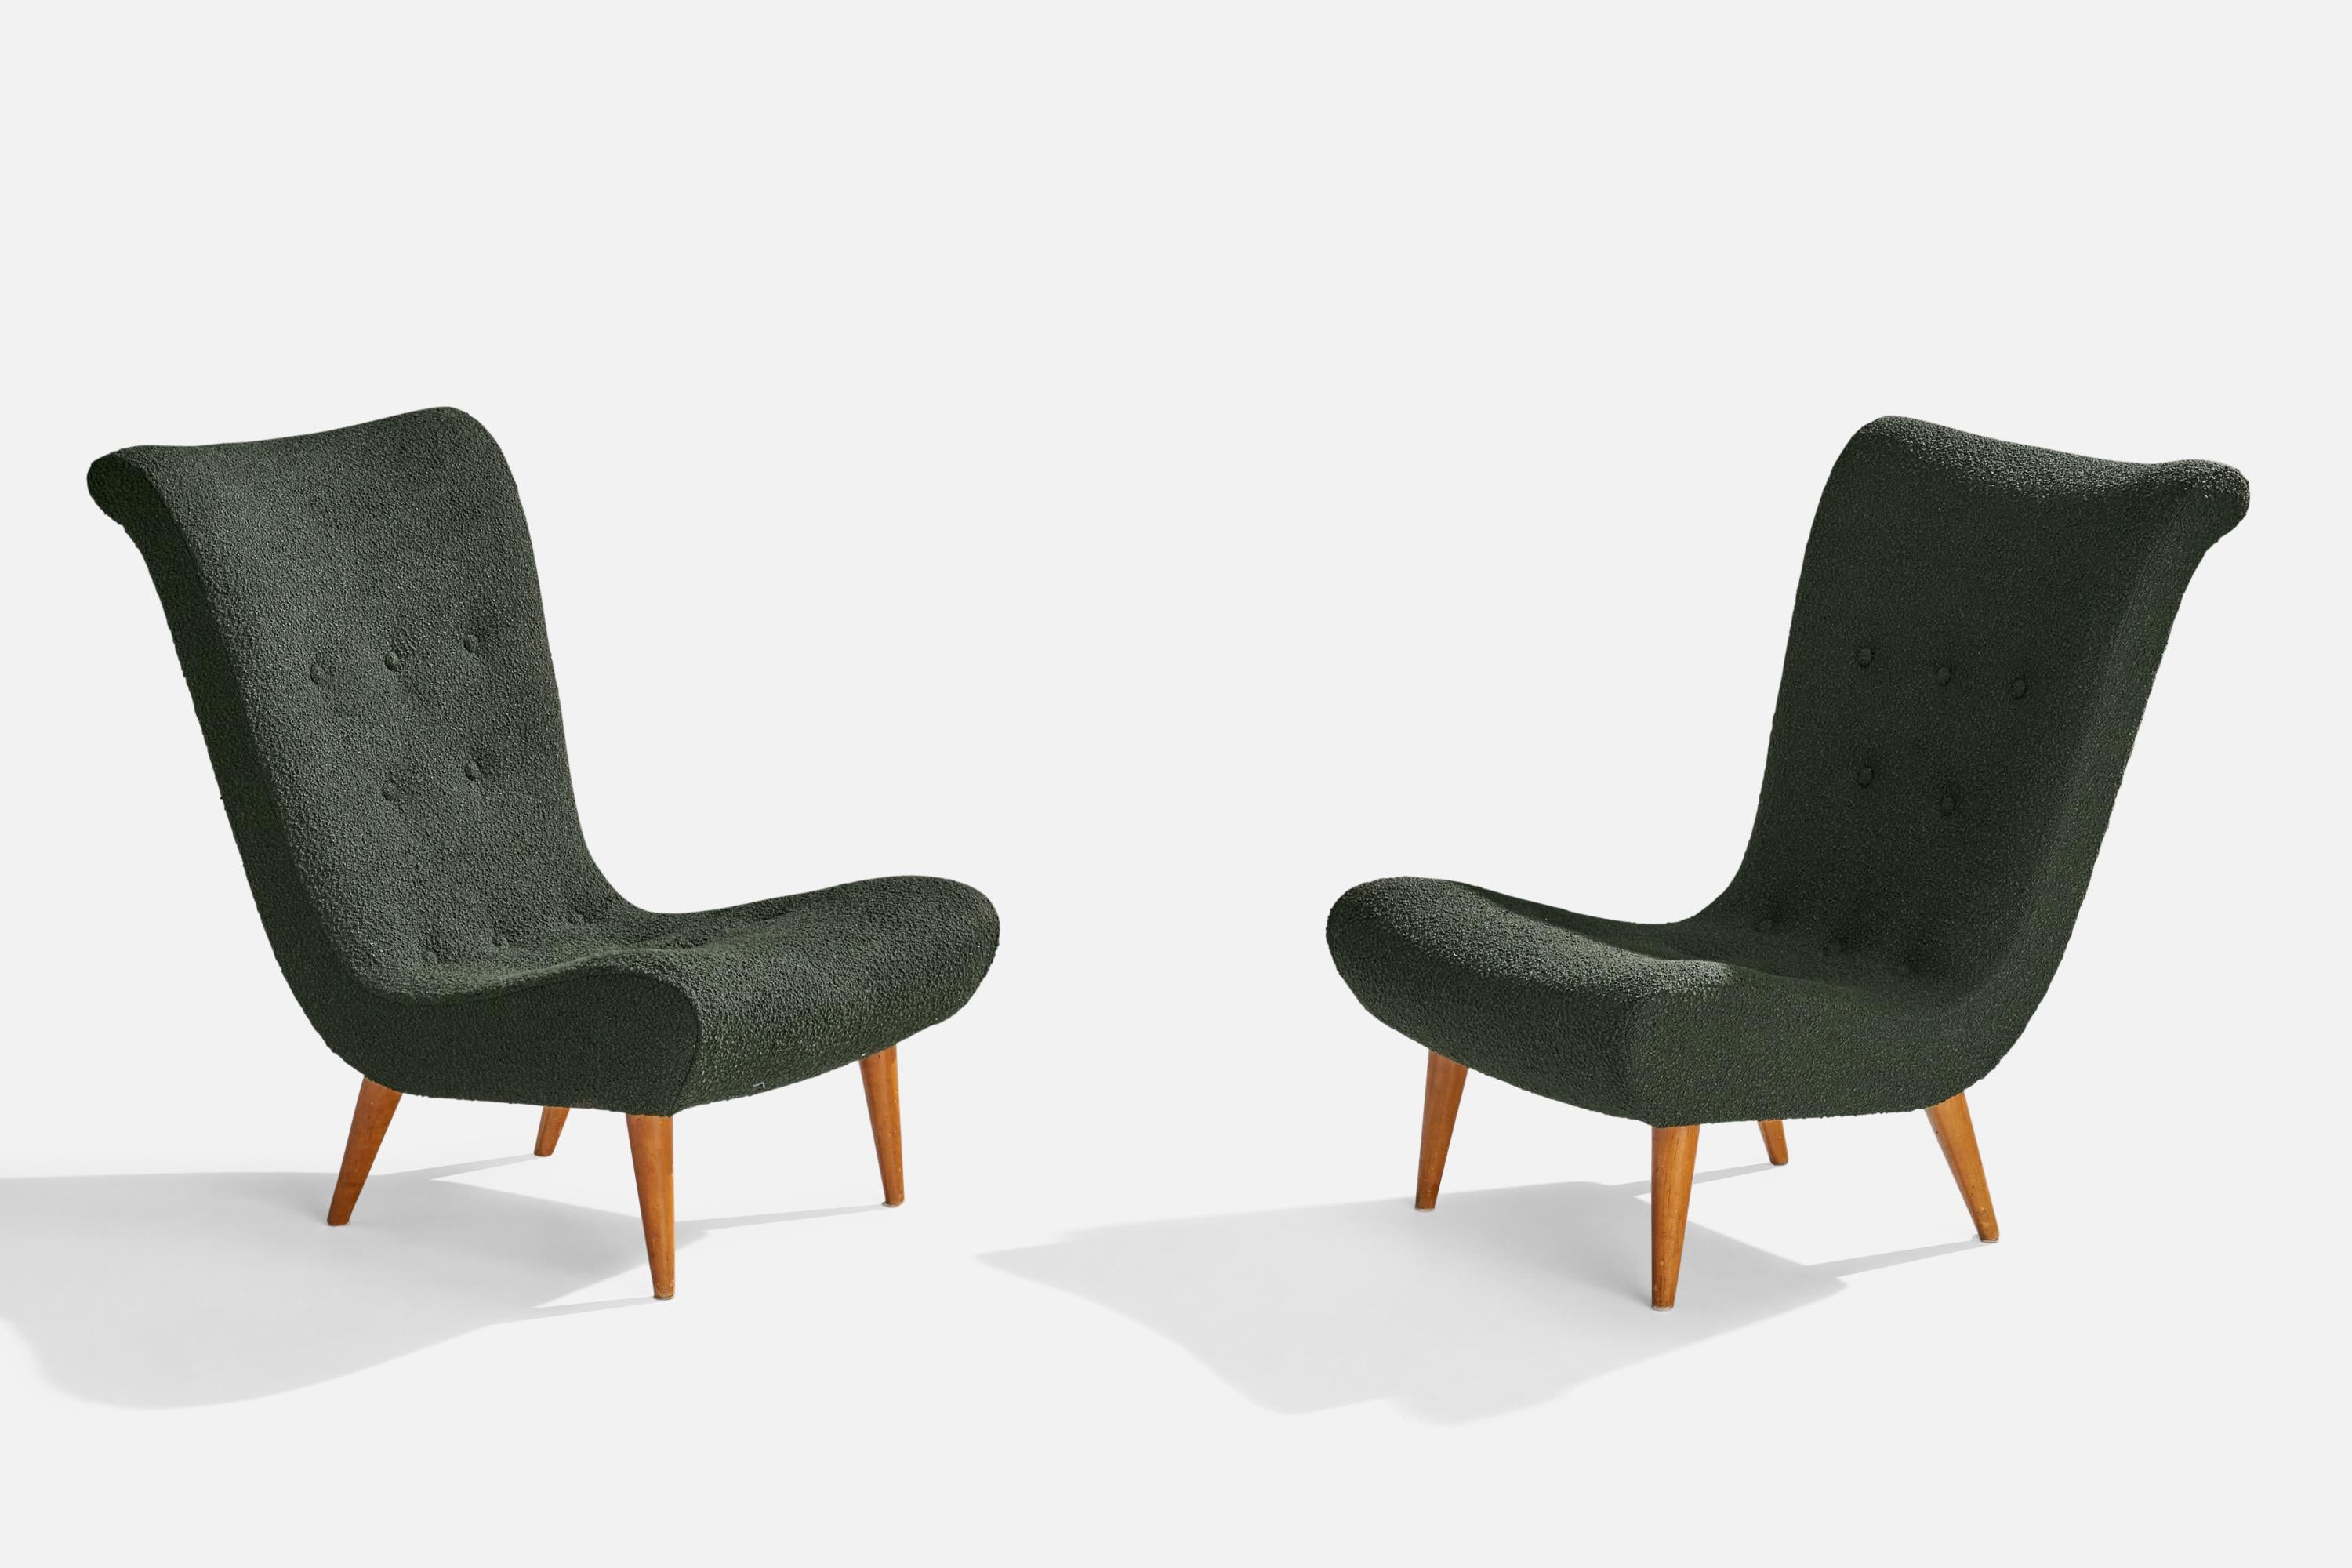 A pair of green bouclé fabric and wood slipper chairs designed and produced in Sweden, c. 1950s.

Seat height 13.5”